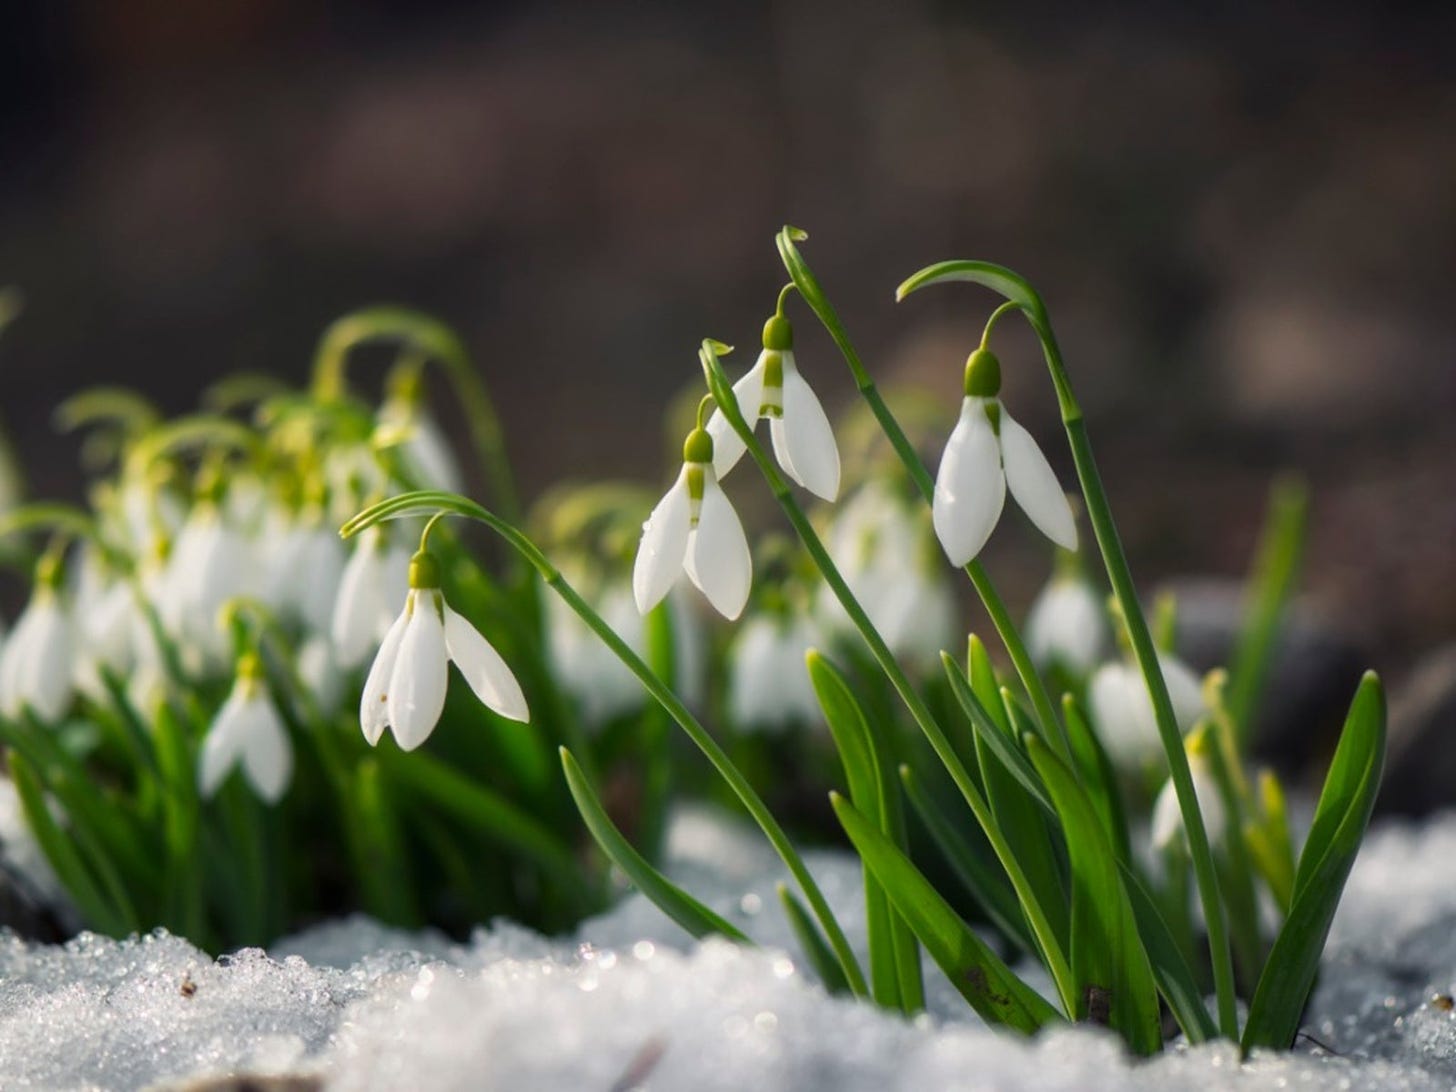 Snowdrop Flowers - How To Plant And Care For Snowdrops ...